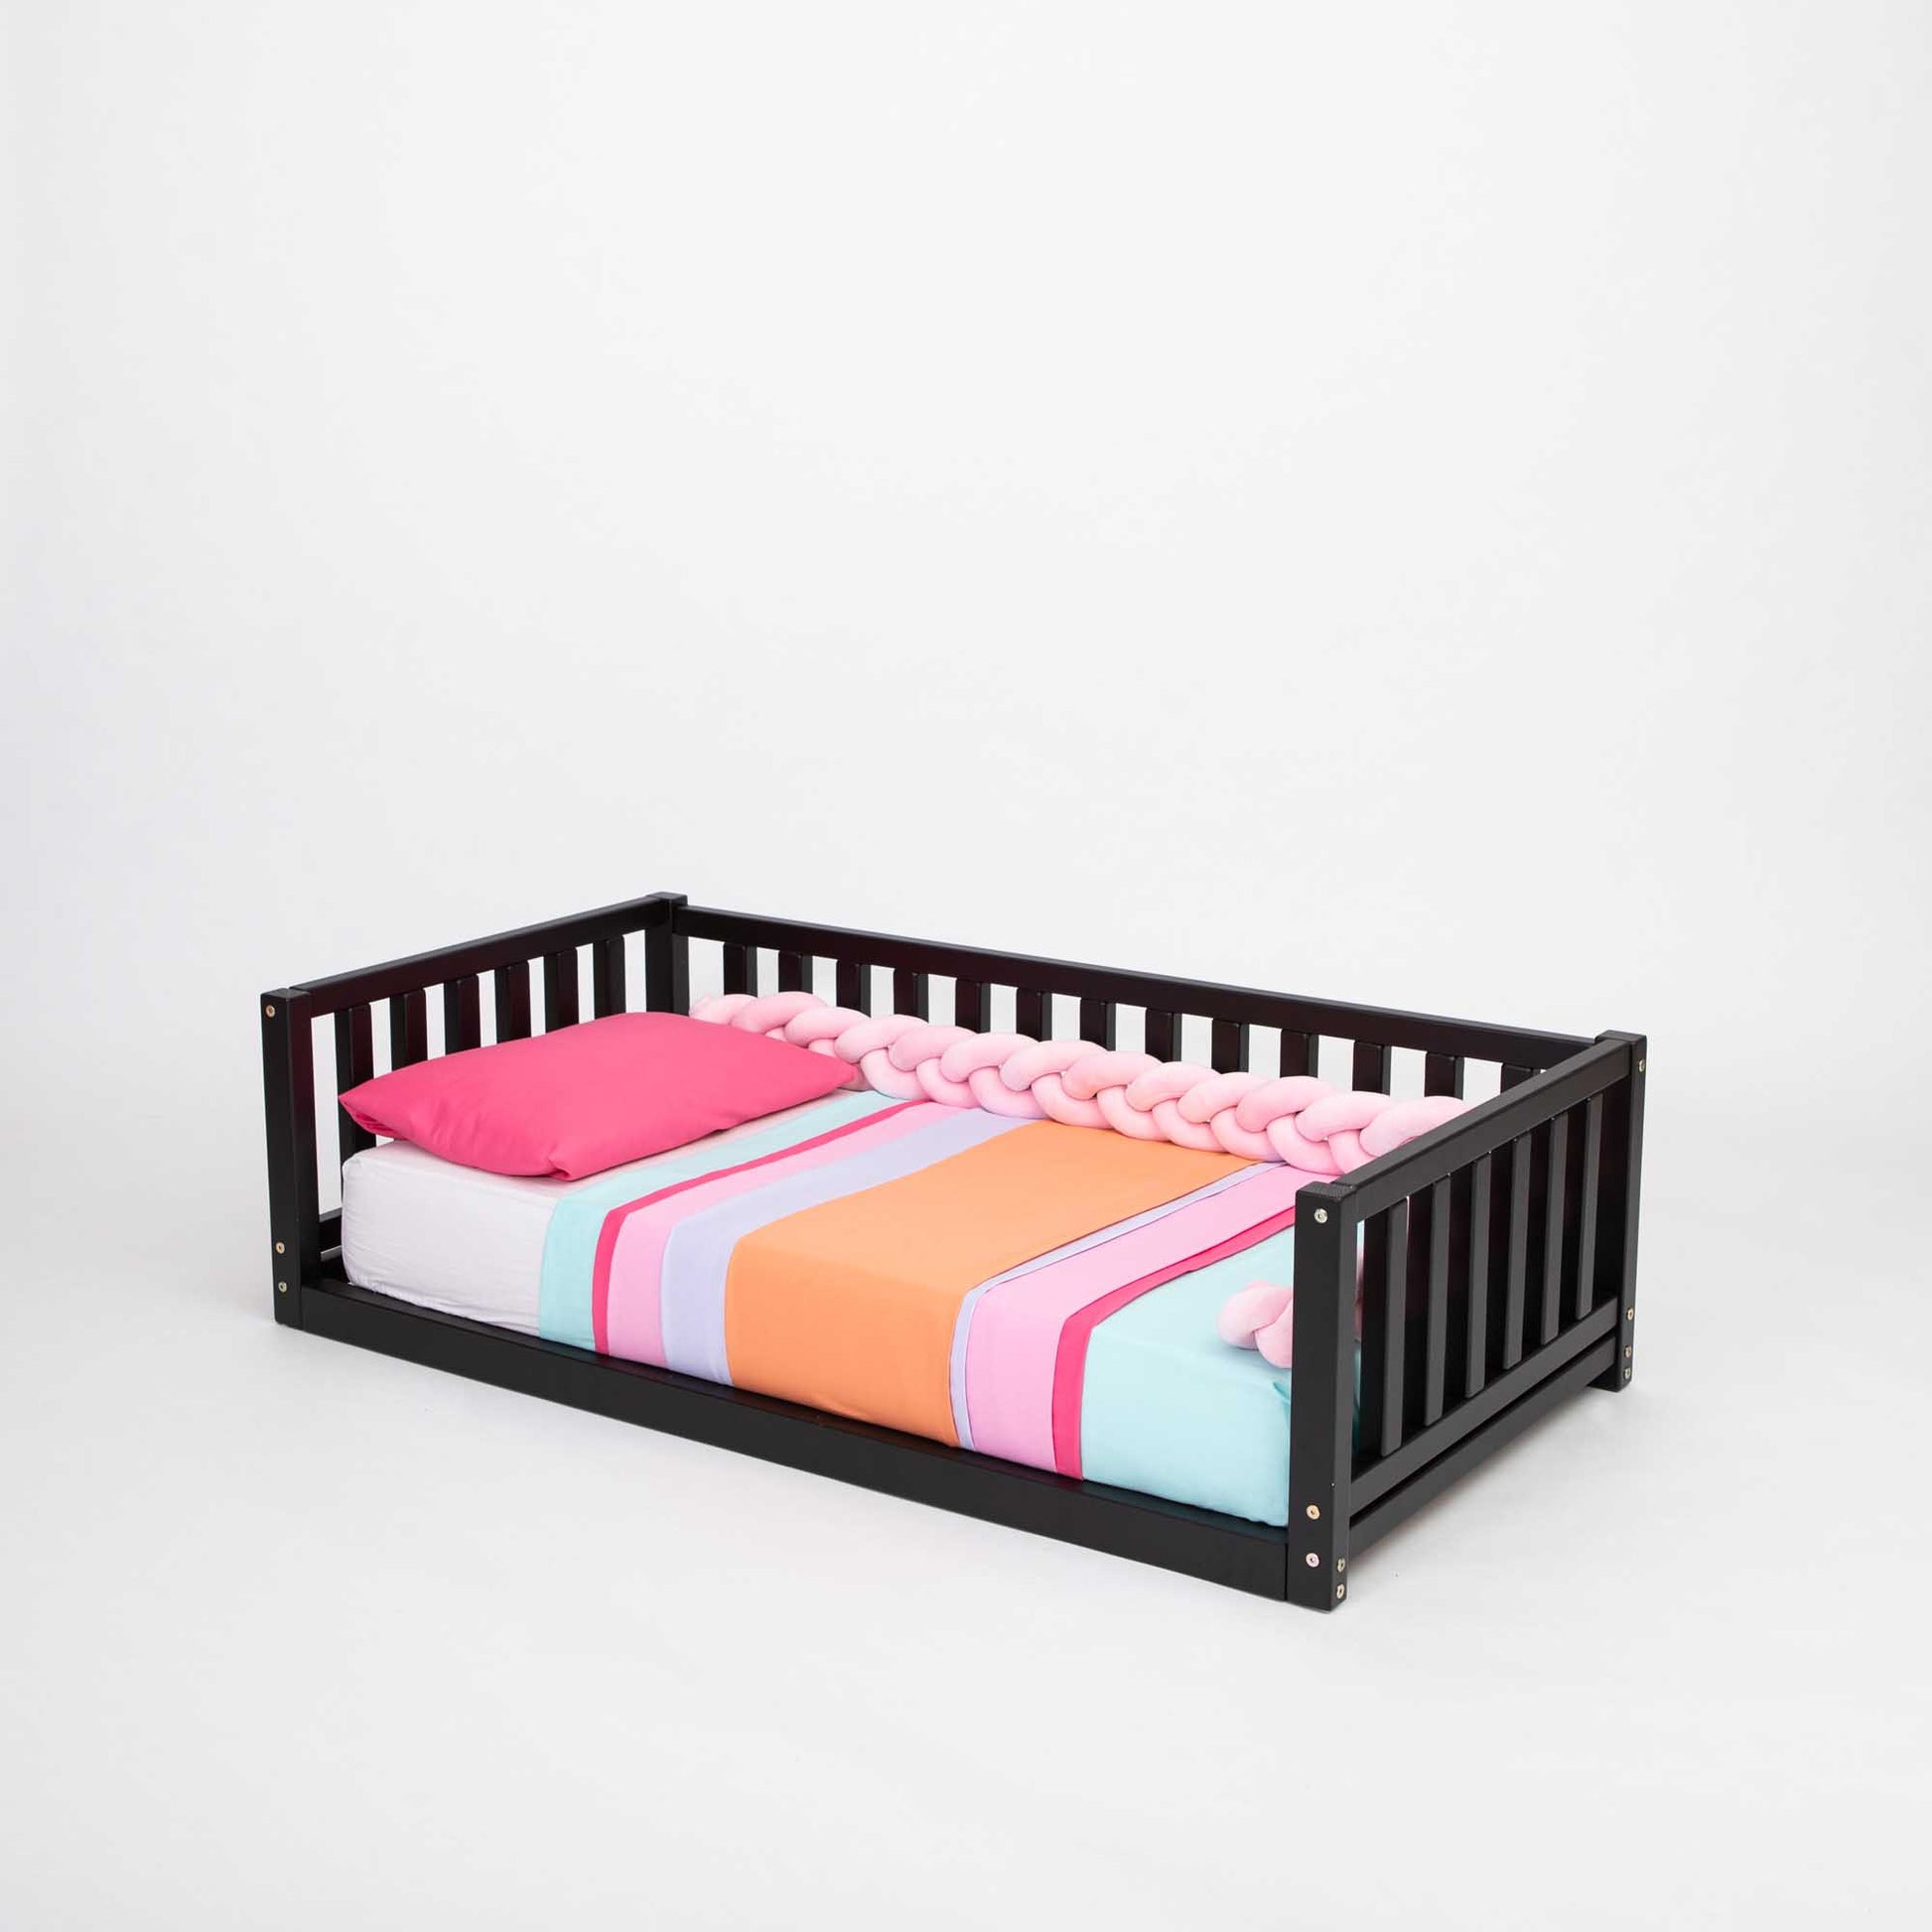 A Sweet Home From Wood 2-in-1 toddler bed on legs with a 3-sided vertical rail, with a colorful blanket on a solid pine or birch wood frame.